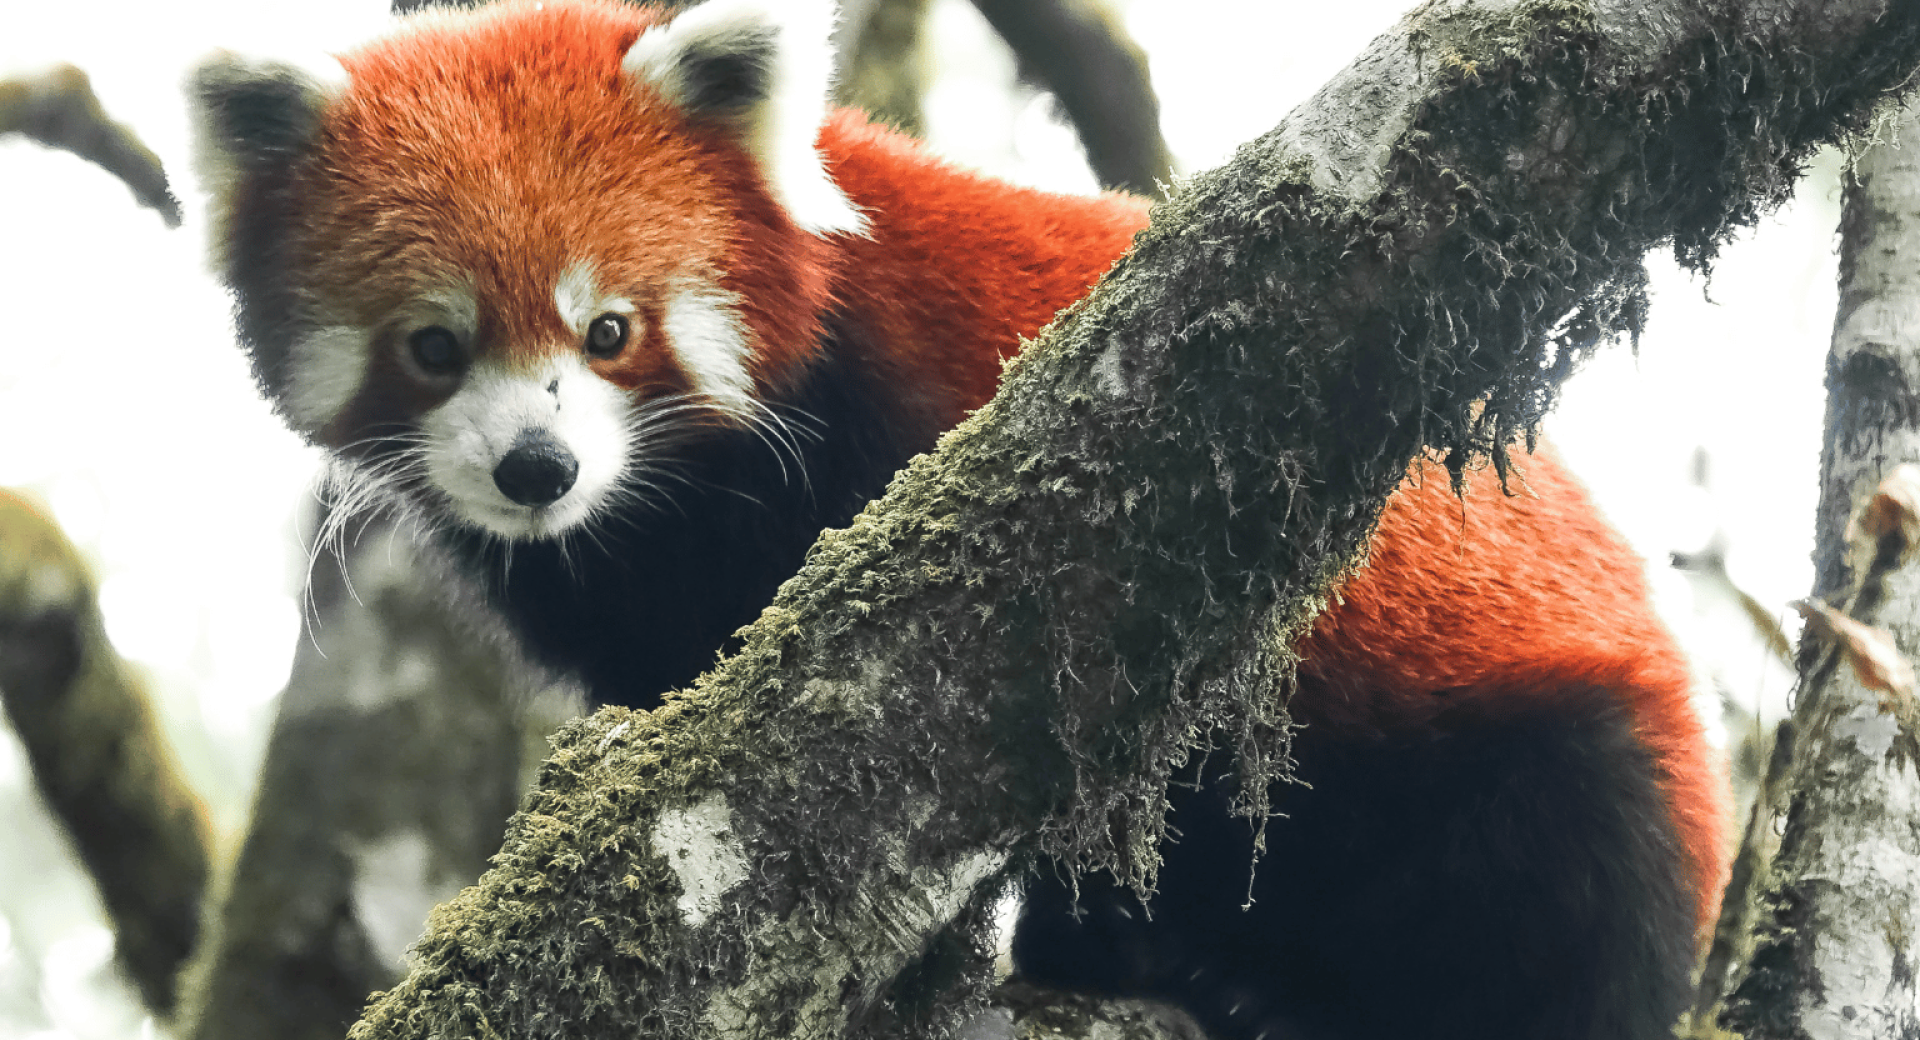 Meet the People Who Are Protecting Red Pandas from Poachers